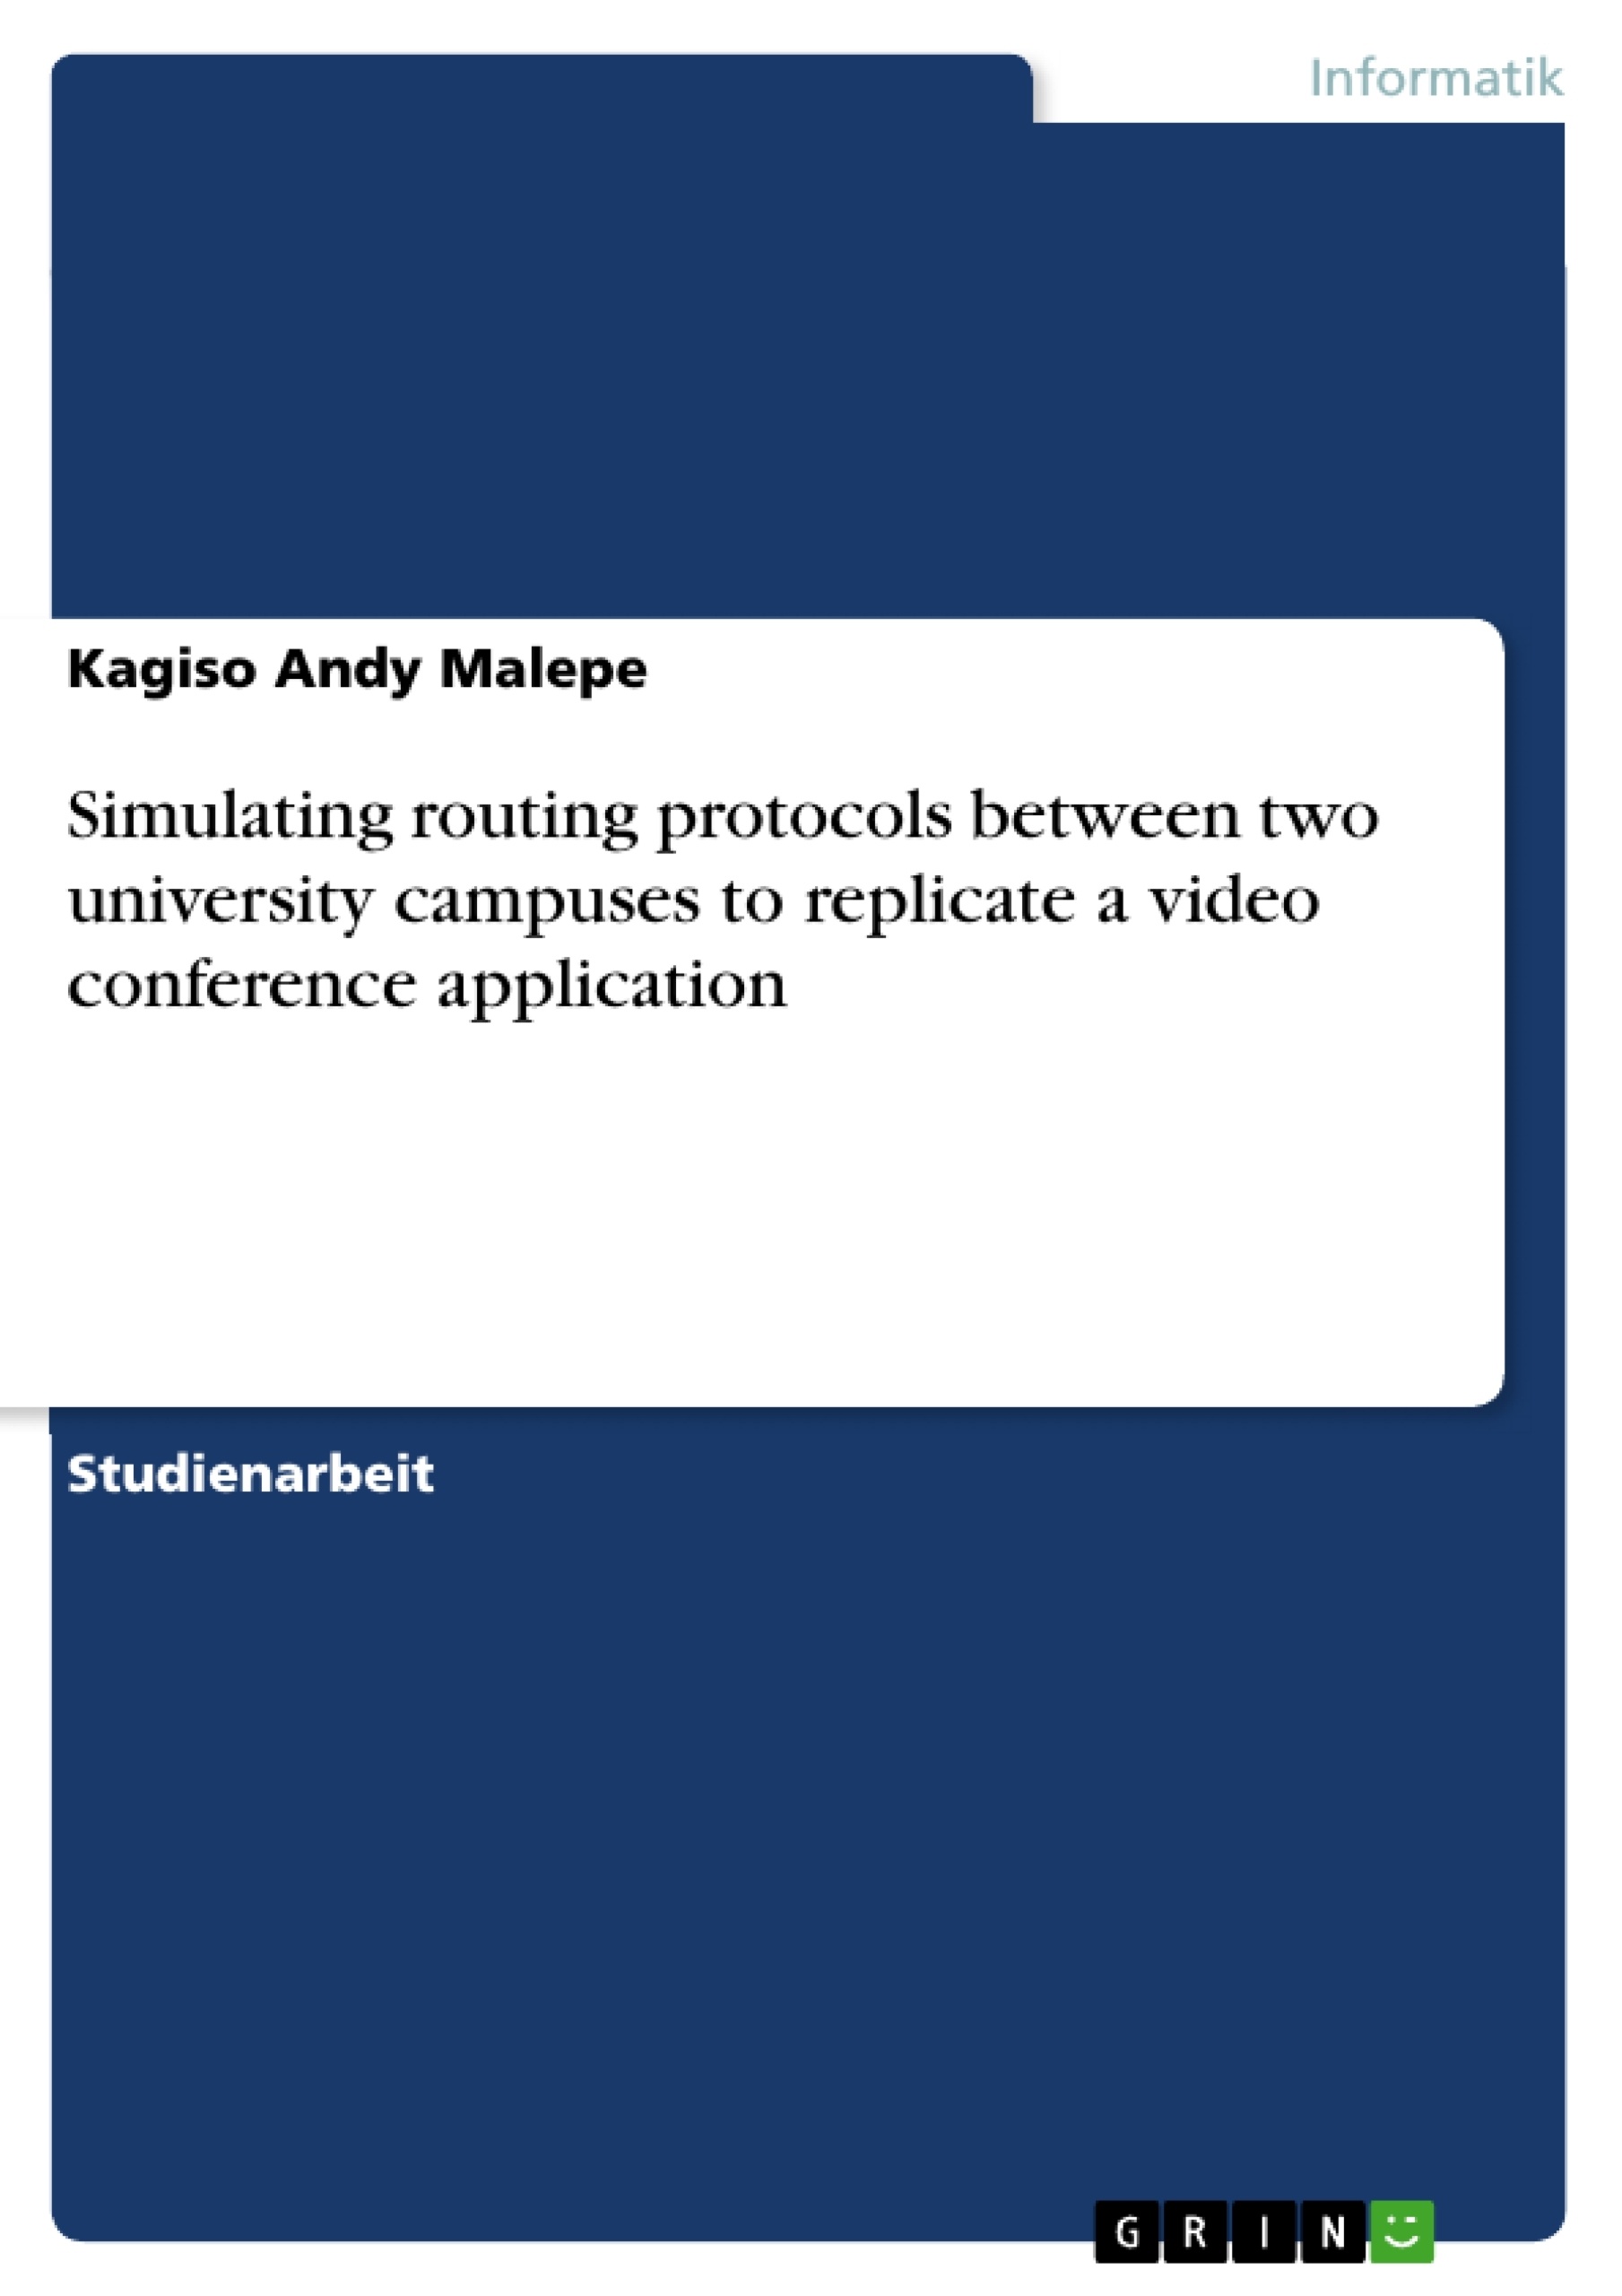 Título: Simulating routing protocols between two university campuses to replicate a video conference application